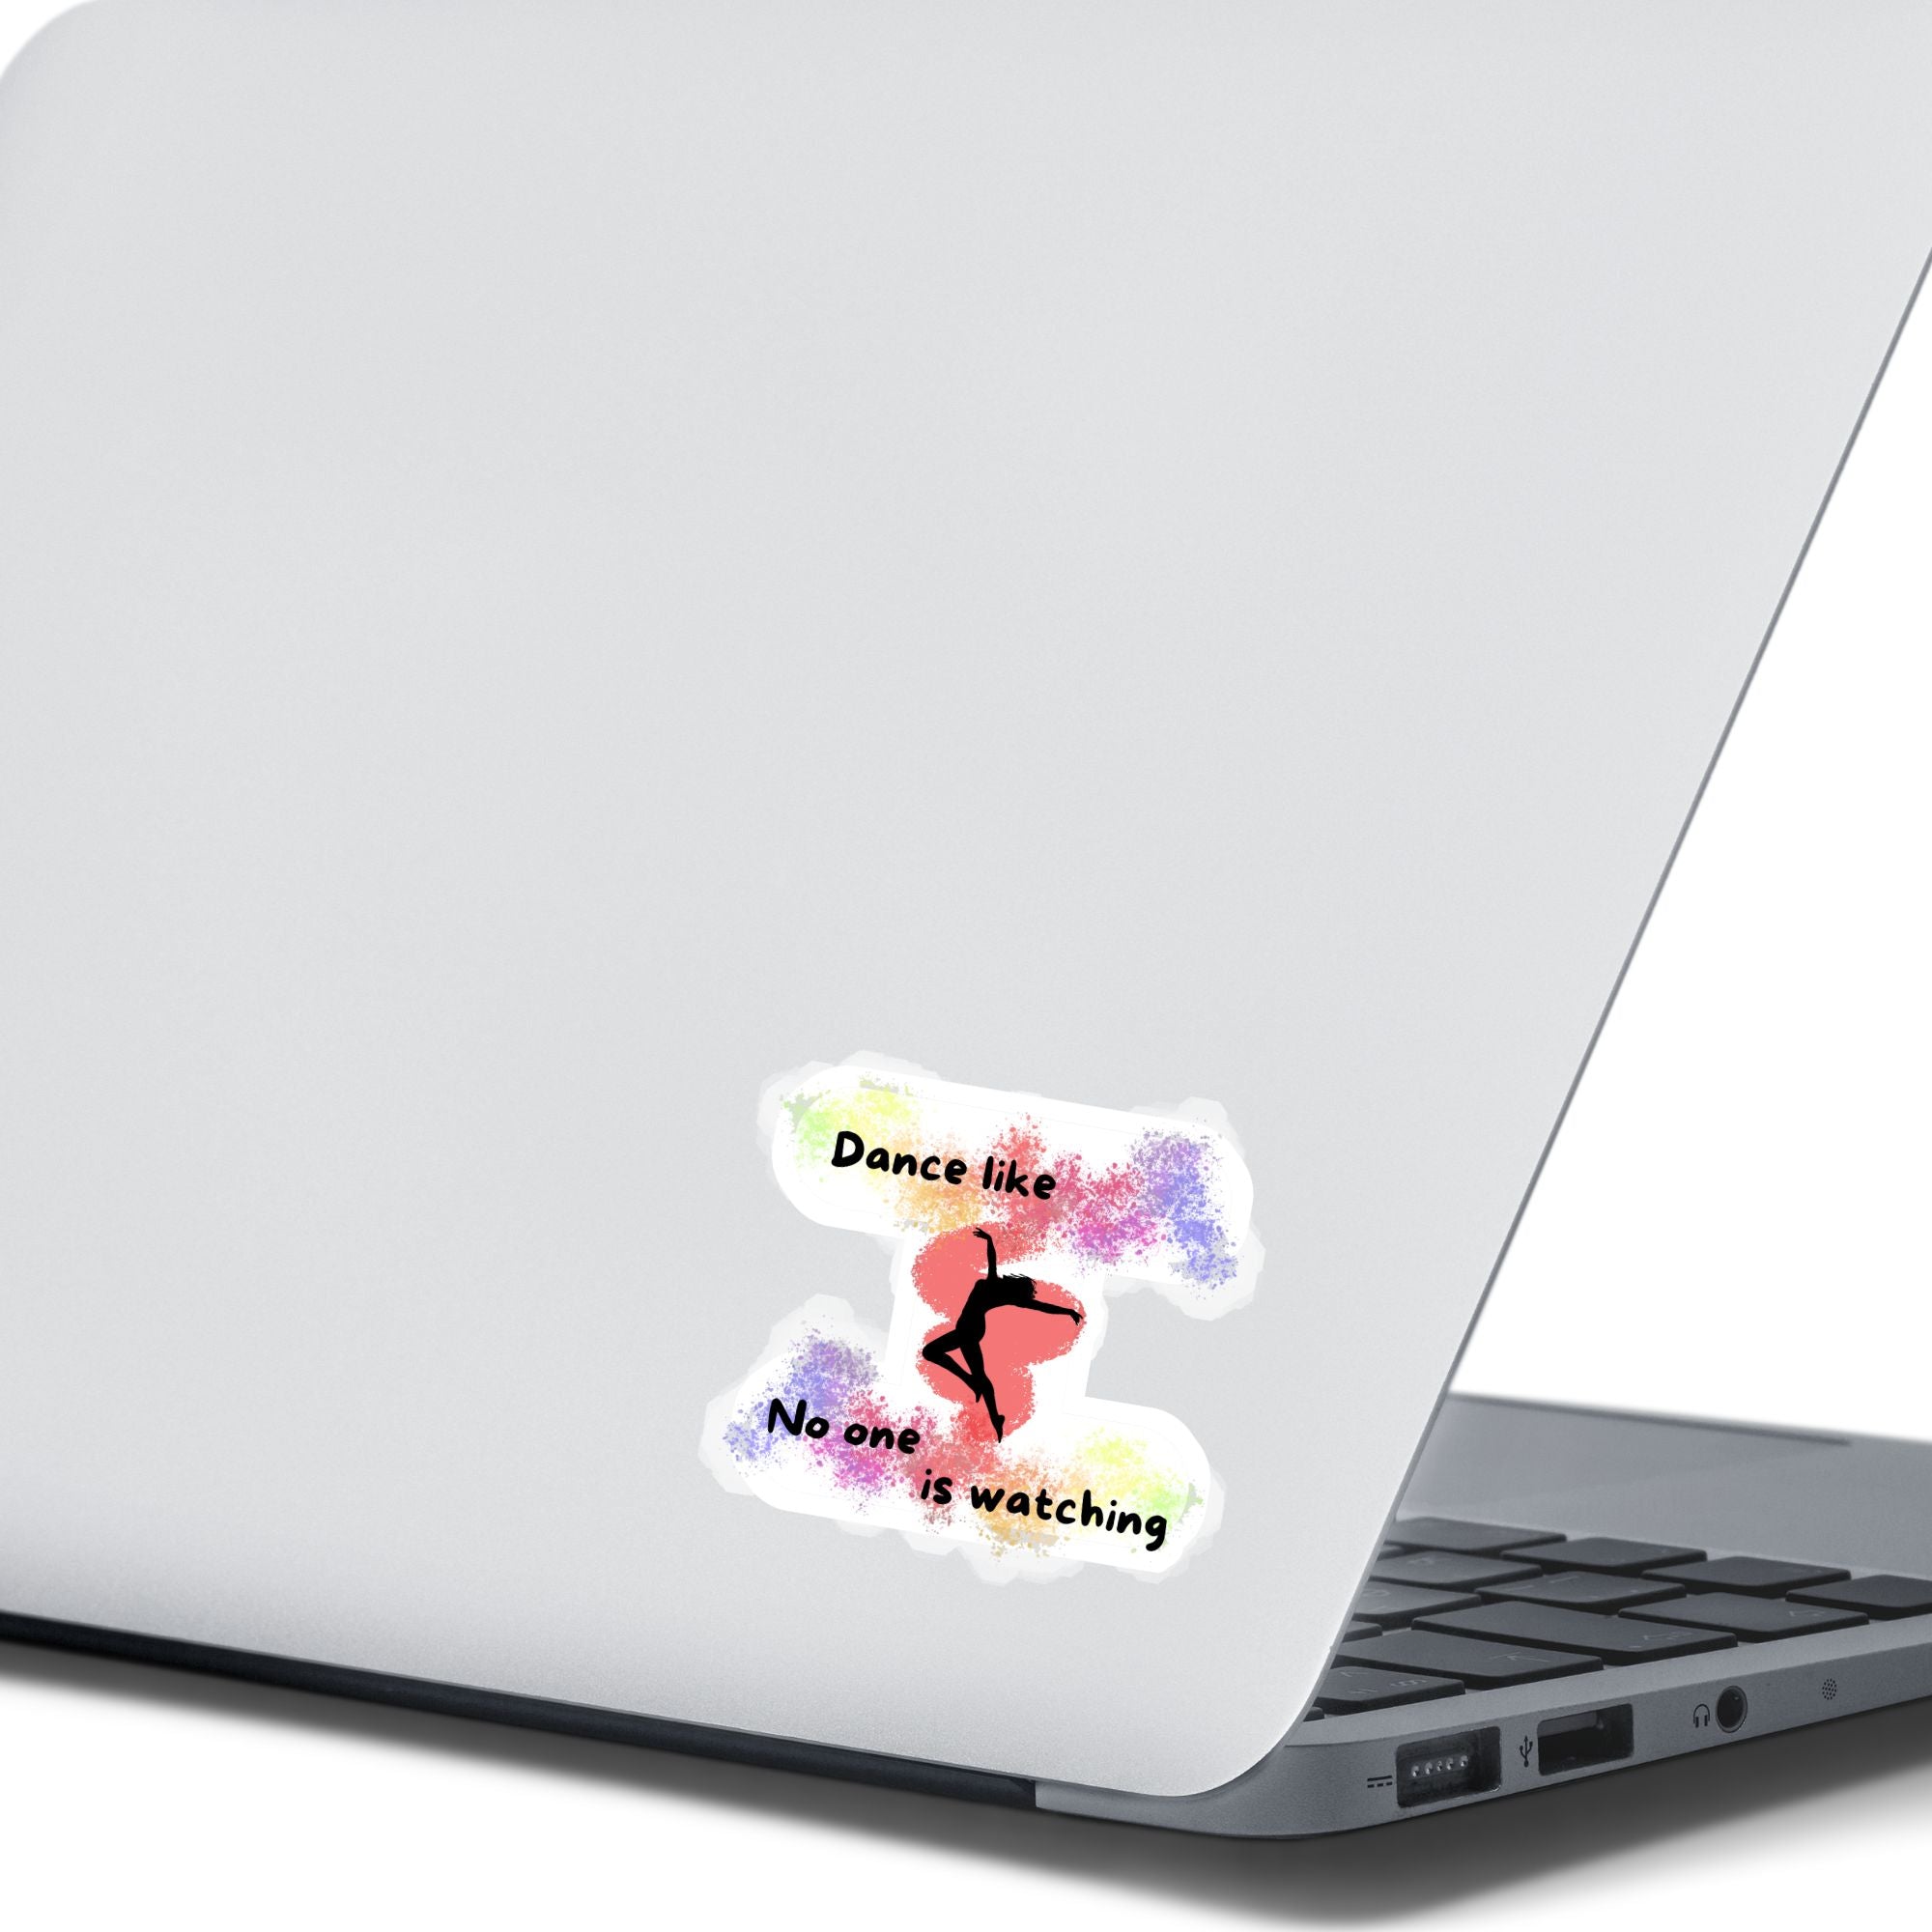 This individual die-cut sticker is perfect for anyone who loves to dance! It features the silhouette of a dancer in the center with the words "Dance like No one is watching", all on a spray paint pastel background. Check out our Inspirational collection for more inspiring stickers! This image shows the Dance like No one is watching sticker on the back of an open laptop.